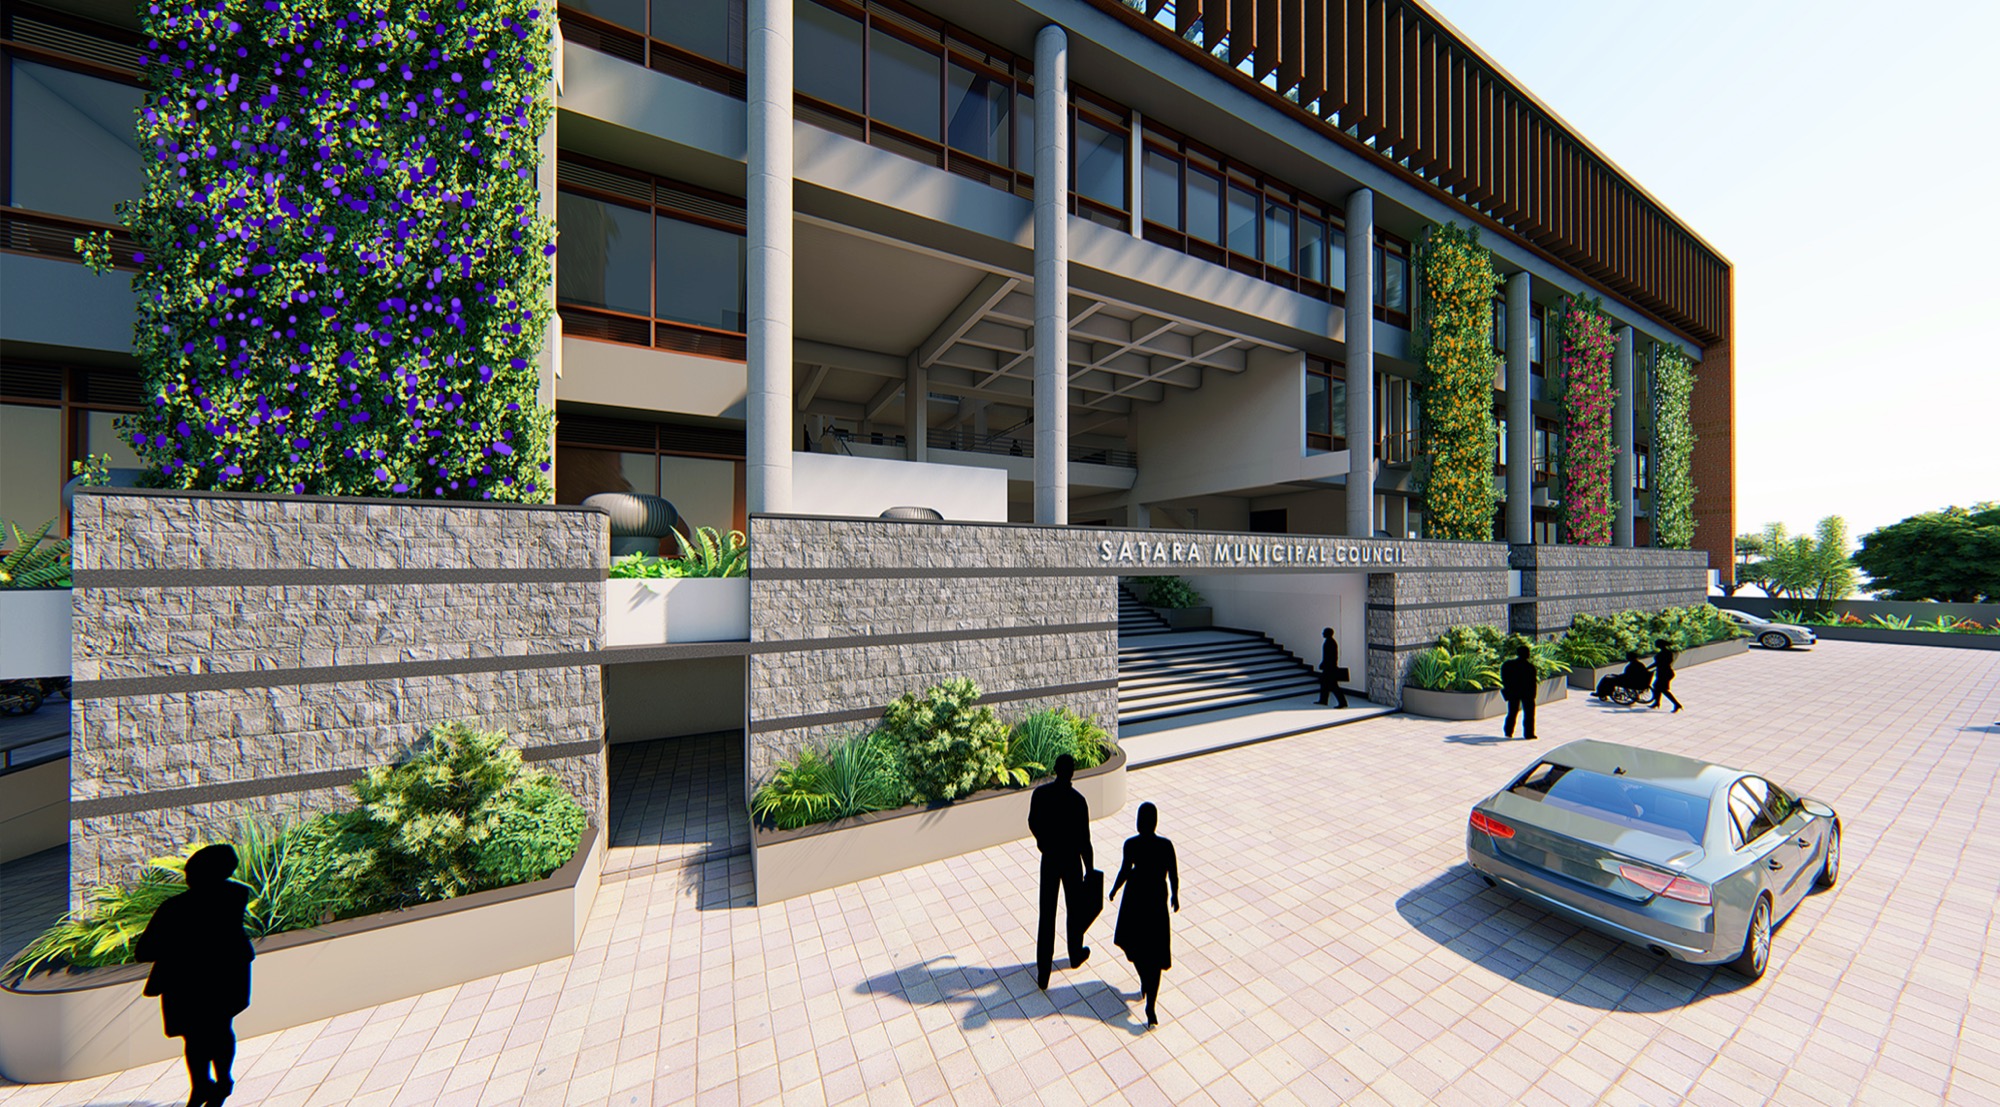 Satara Municipal Corporation, Competition Entry by KENARCH Architects, Pune 18